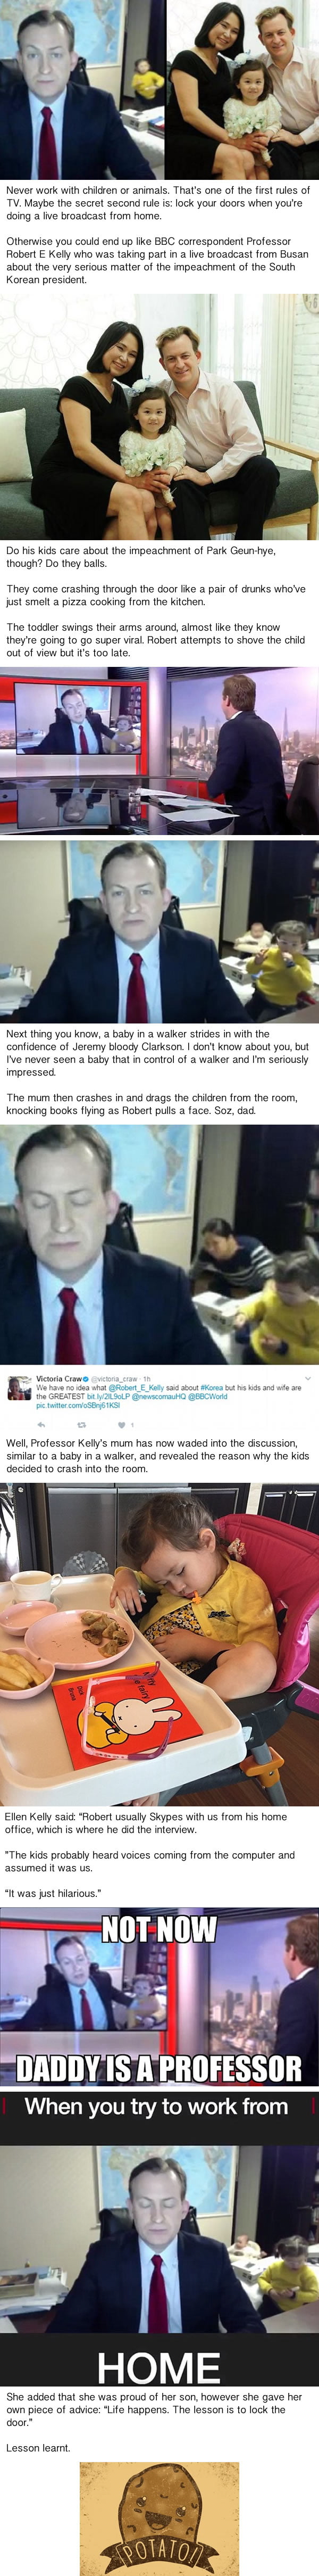 Mother Of BBC News Live Guest Reveals Reason Why Kids Burst Through The Door